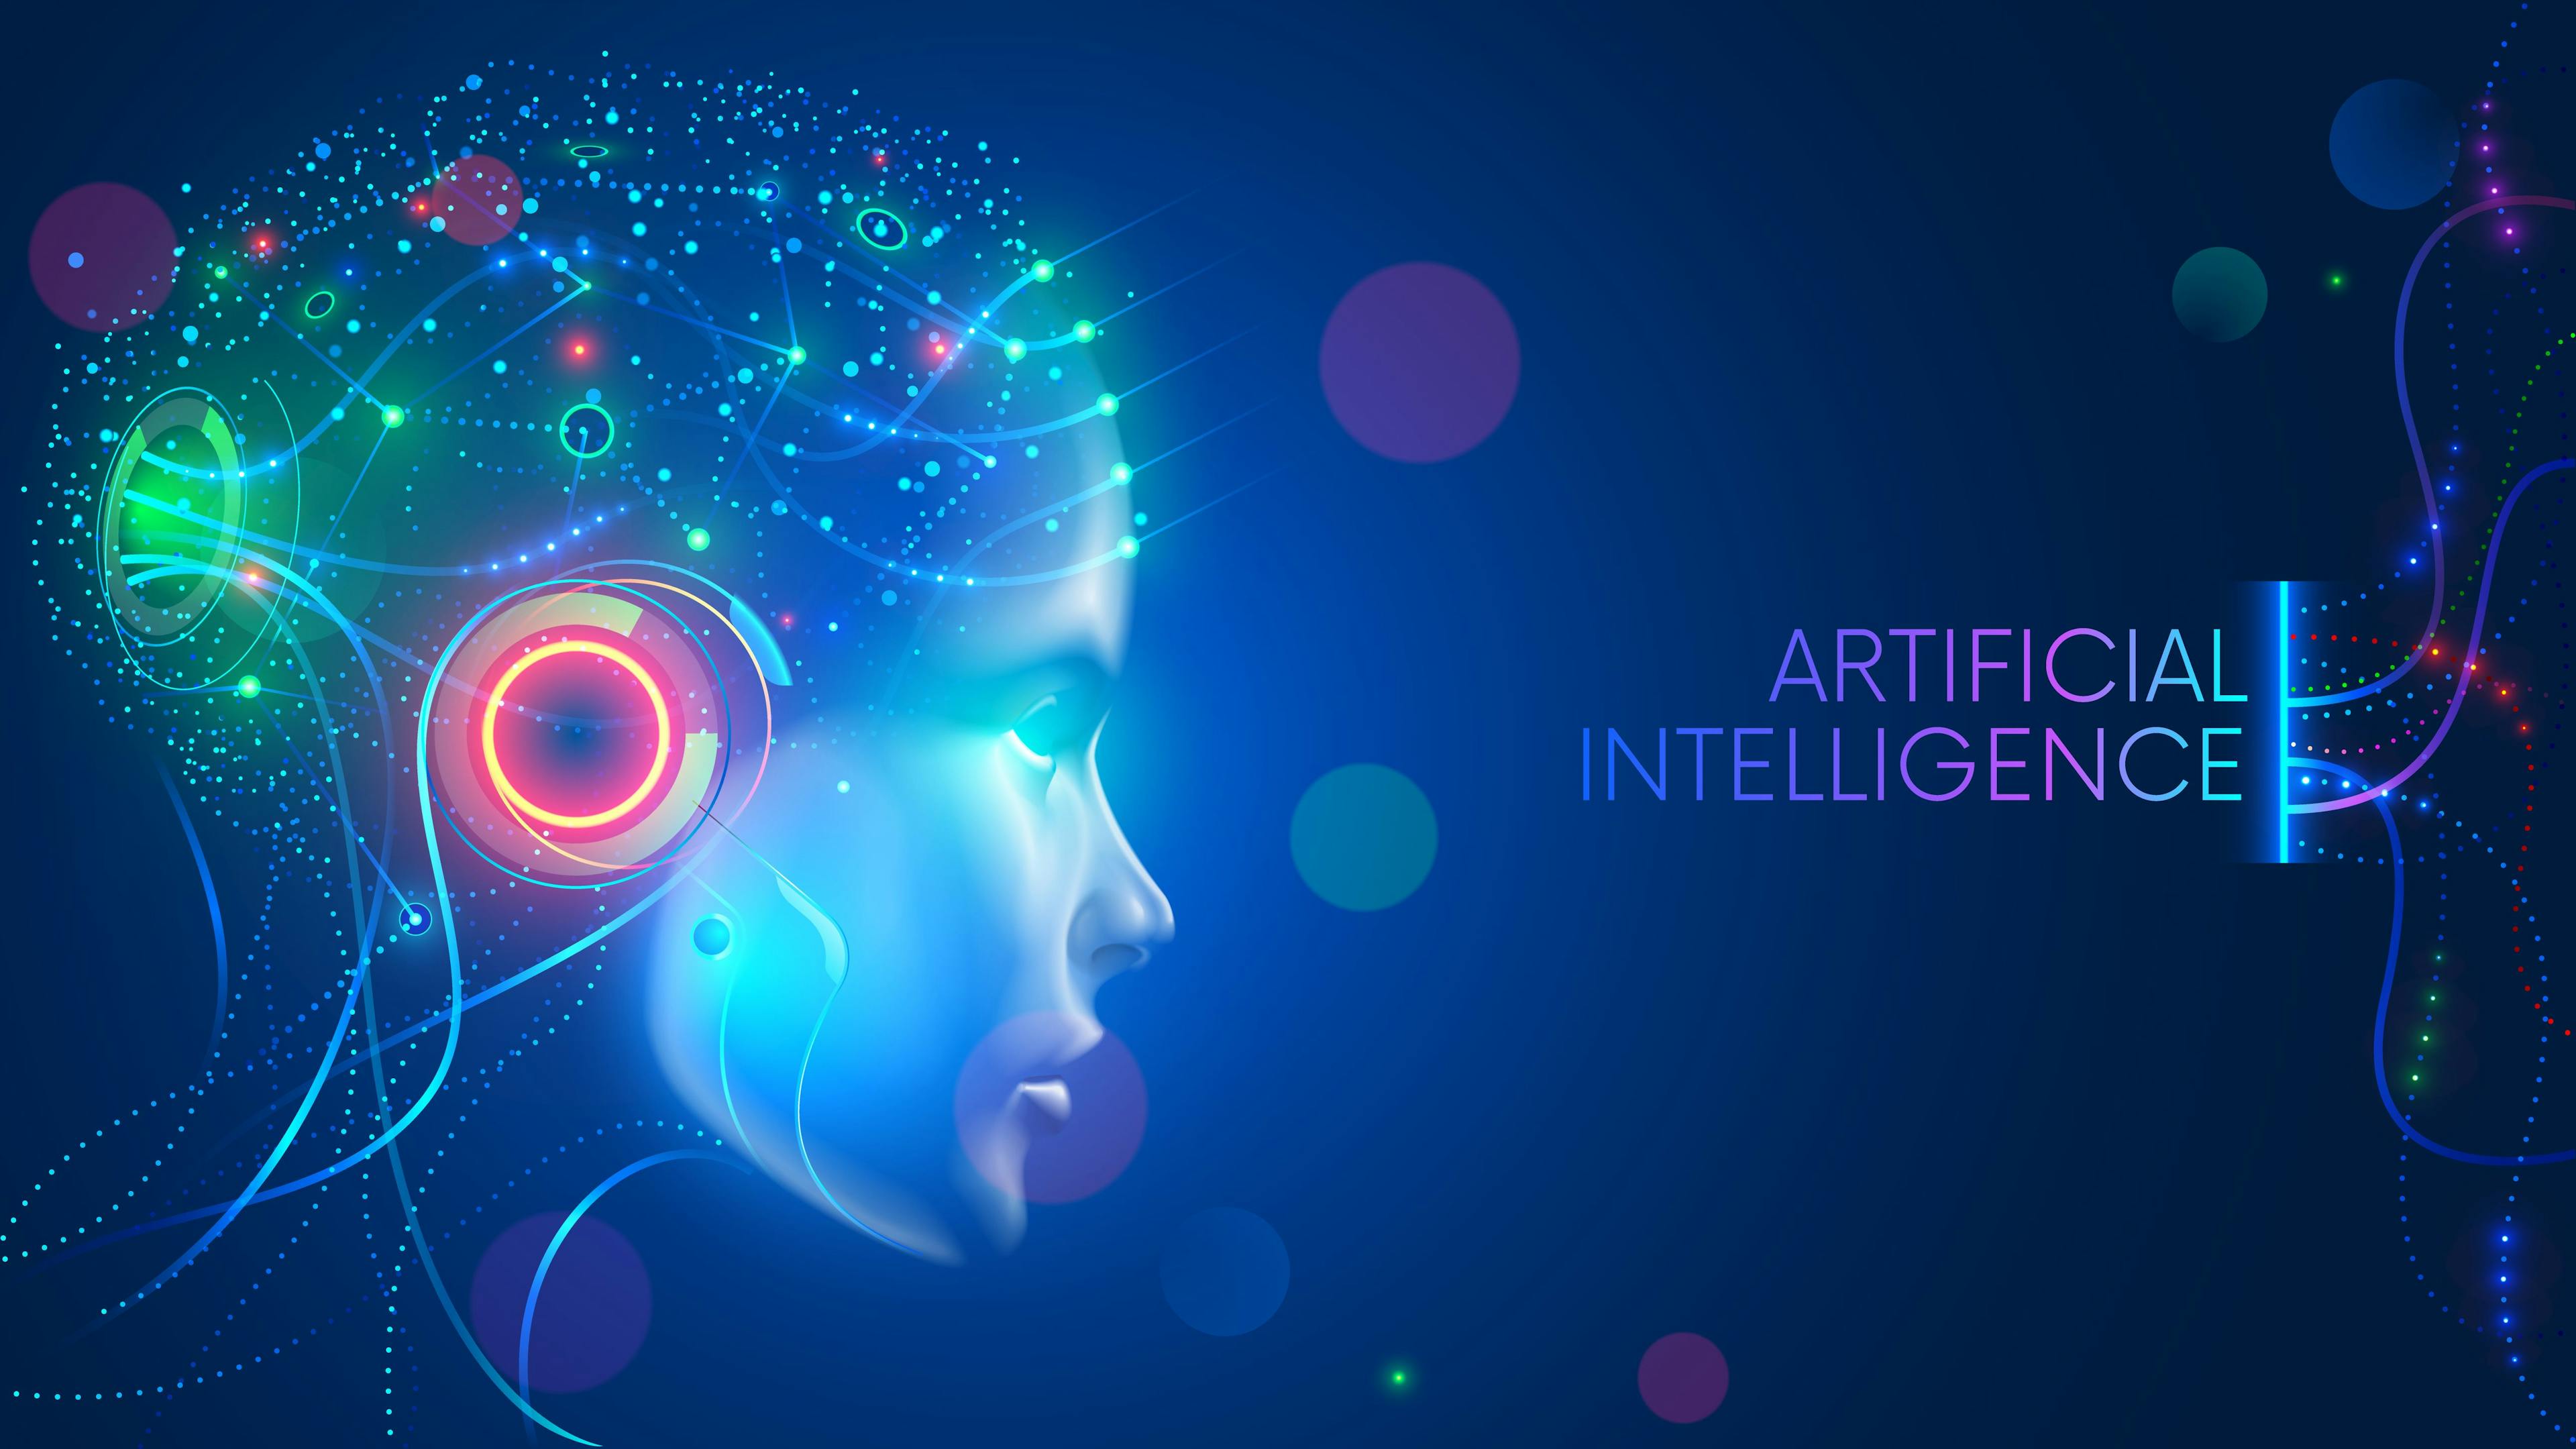 Artificial intelligence in humanoid head with neural network thinks. AI with Digital Brain is learning processing big data, analysis information. Face of cyber mind. Technology background concept. | Image Credit: © AndSus - stock.adobe.com